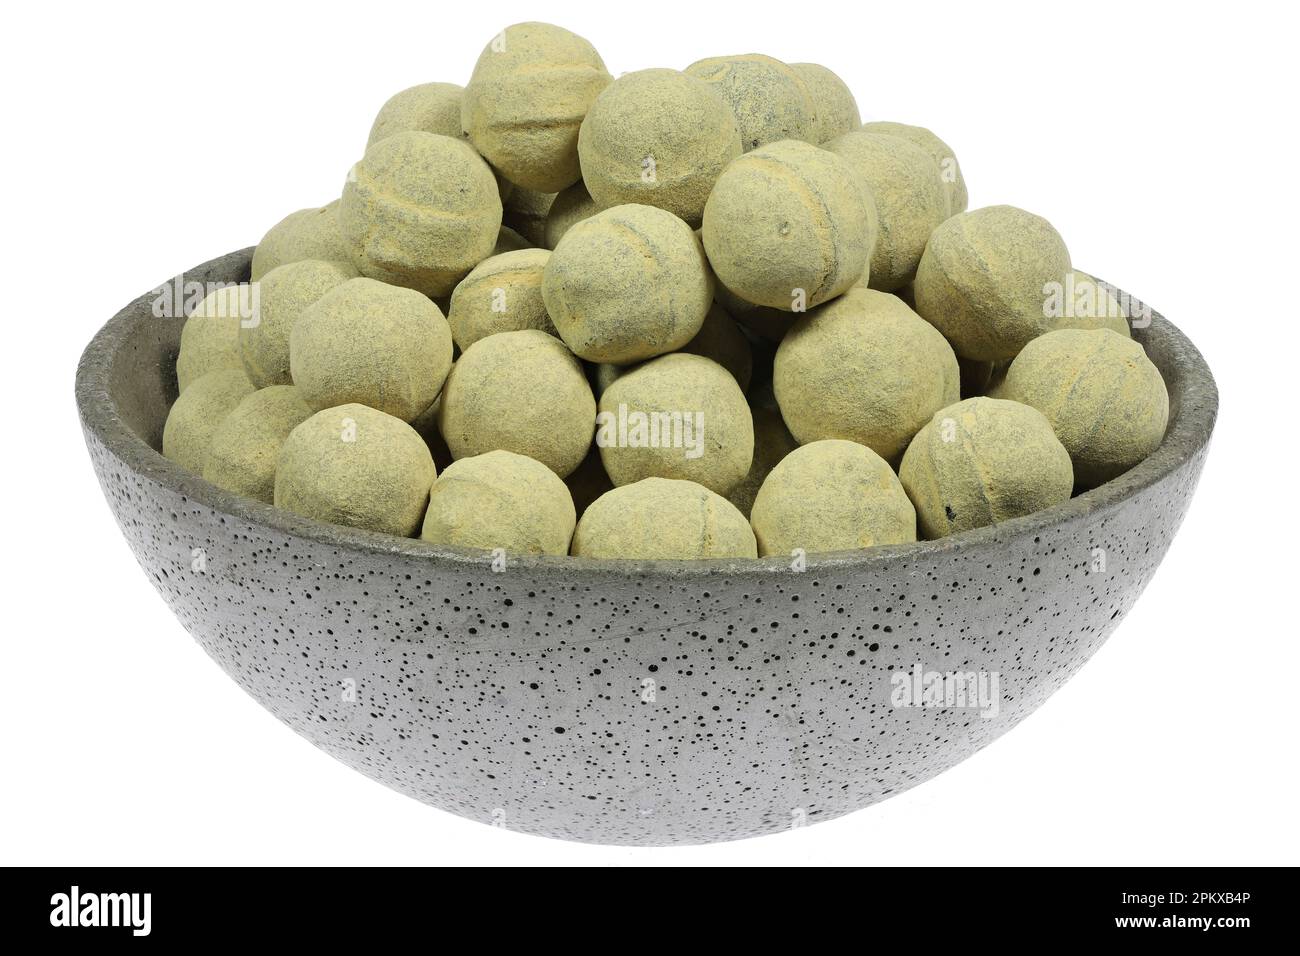 salmiak hagel candies in a concrete bowl isolated on white background Stock Photo